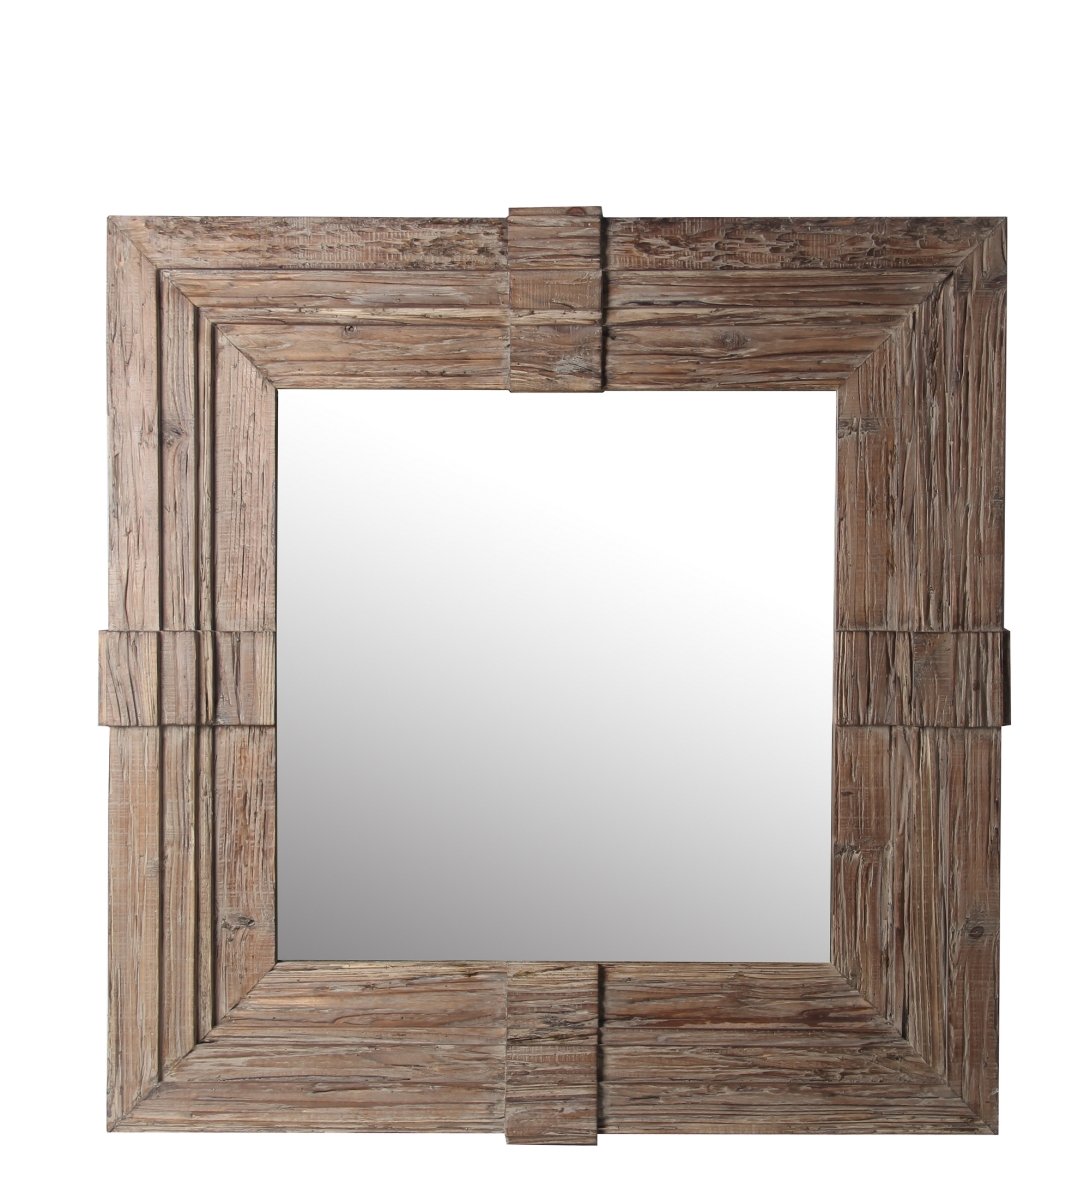 76027 Carved Wood Mirror - Natural